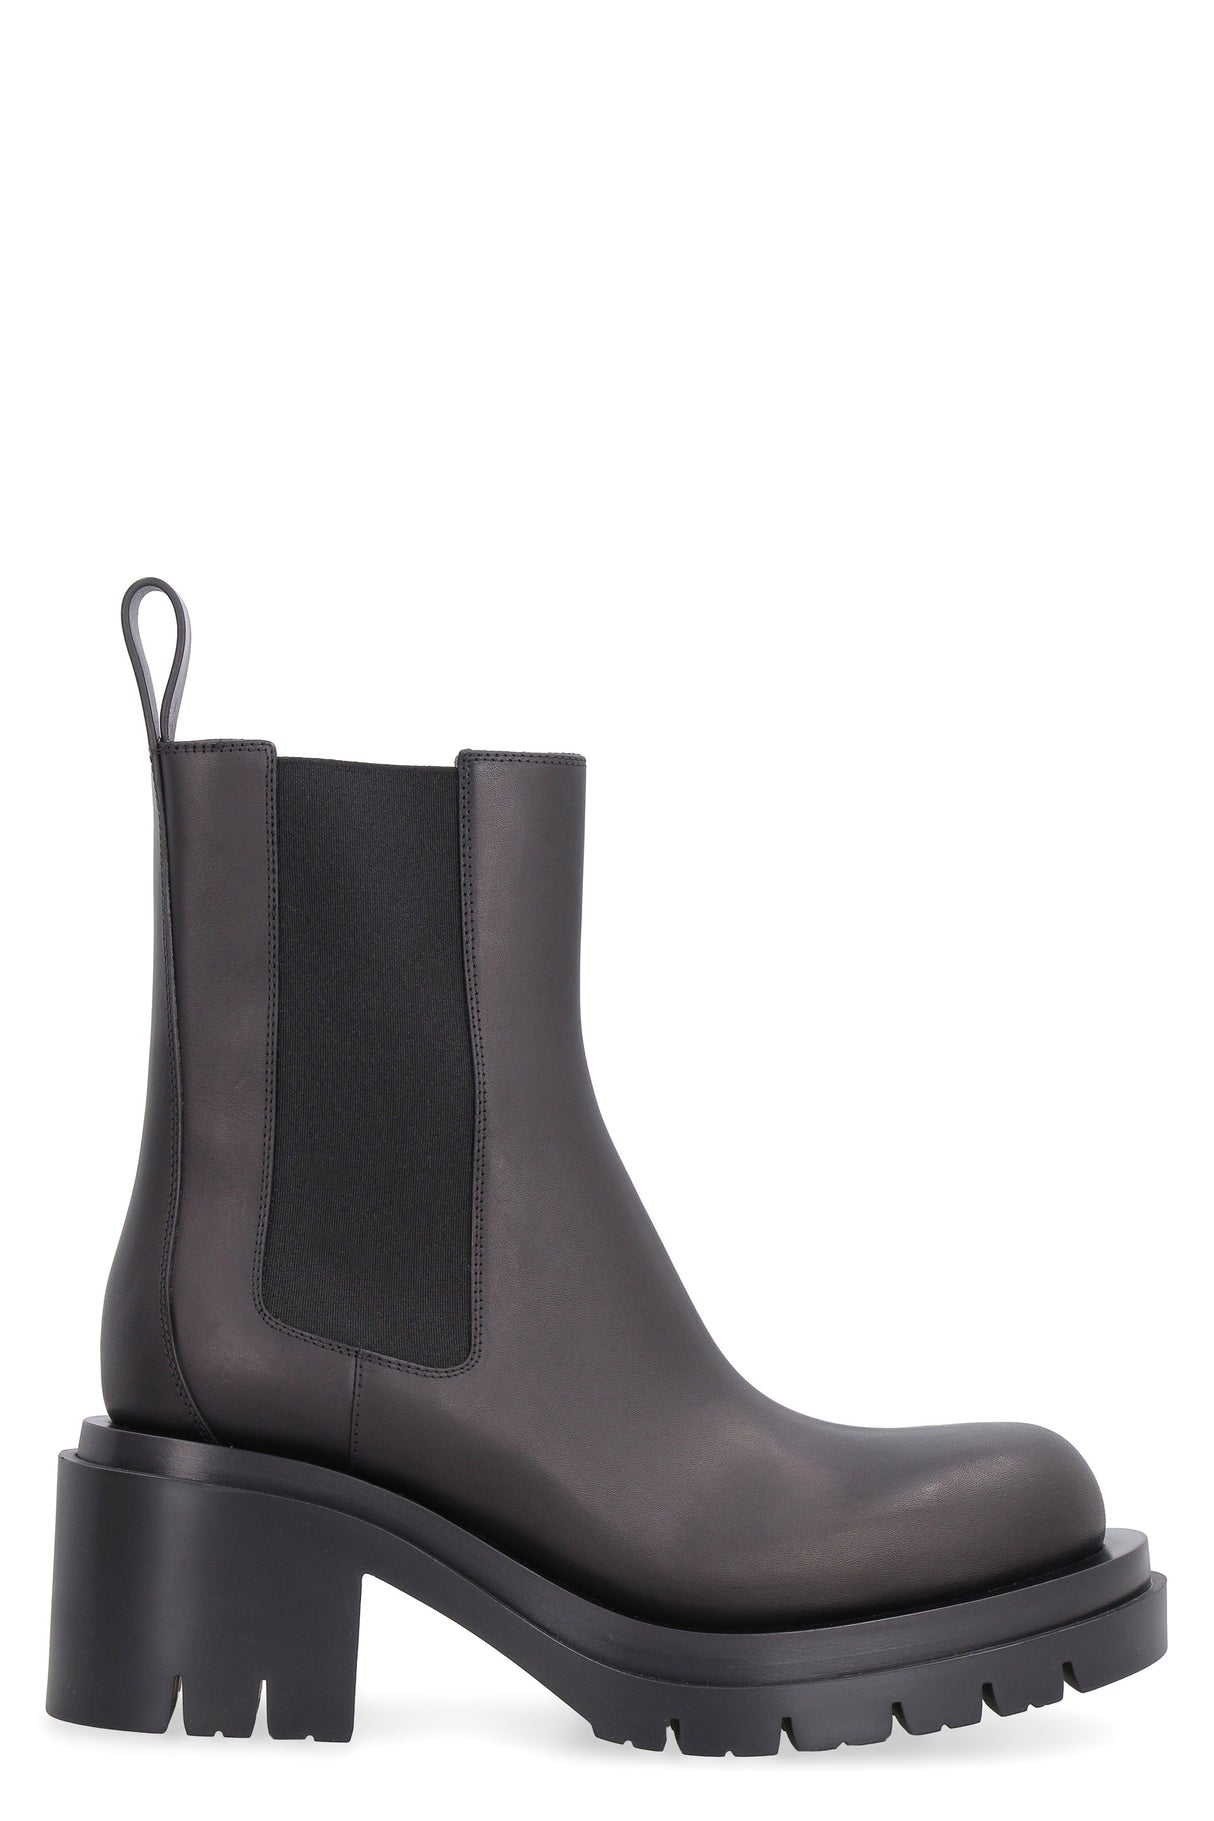 Ultimate Winter Fashion: Women's Black Leather Lug Boots